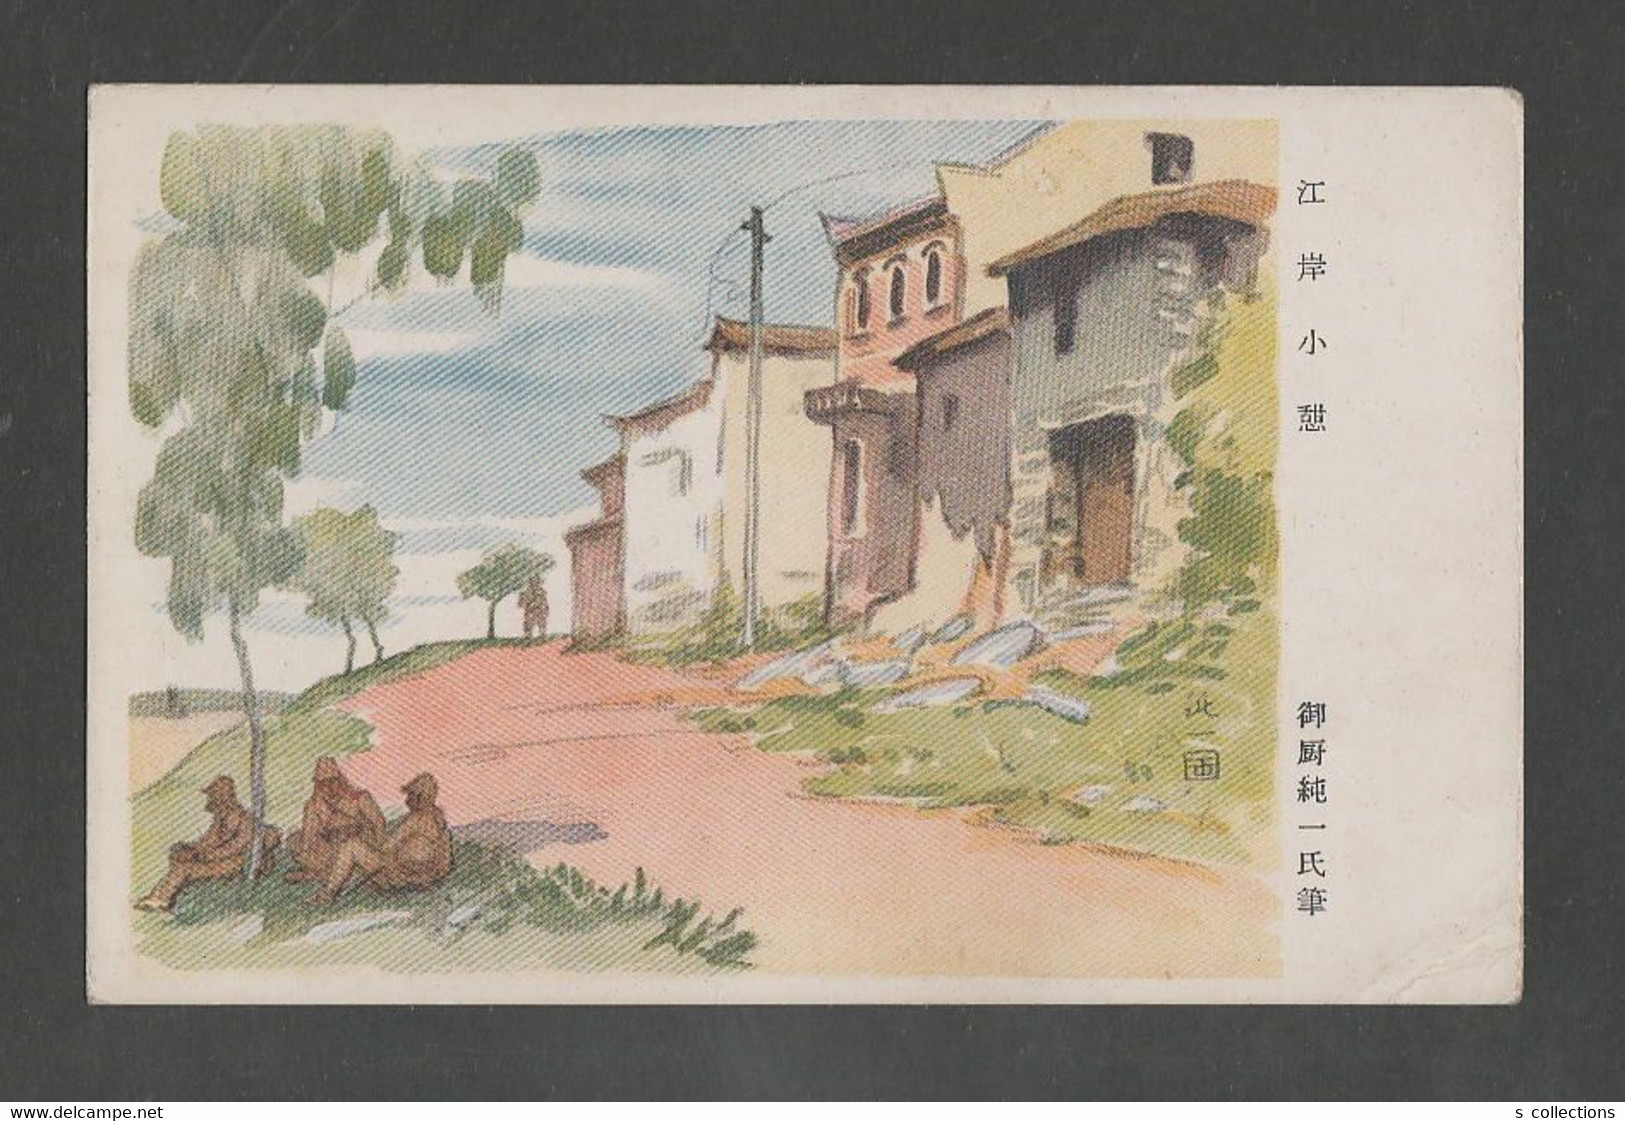 JAPAN WWII Military Jiang'an Picture Postcard NORTH CHINA WW2 MANCHURIA CHINE MANDCHOUKOUO JAPON GIAPPONE - 1941-45 Cina Del Nord